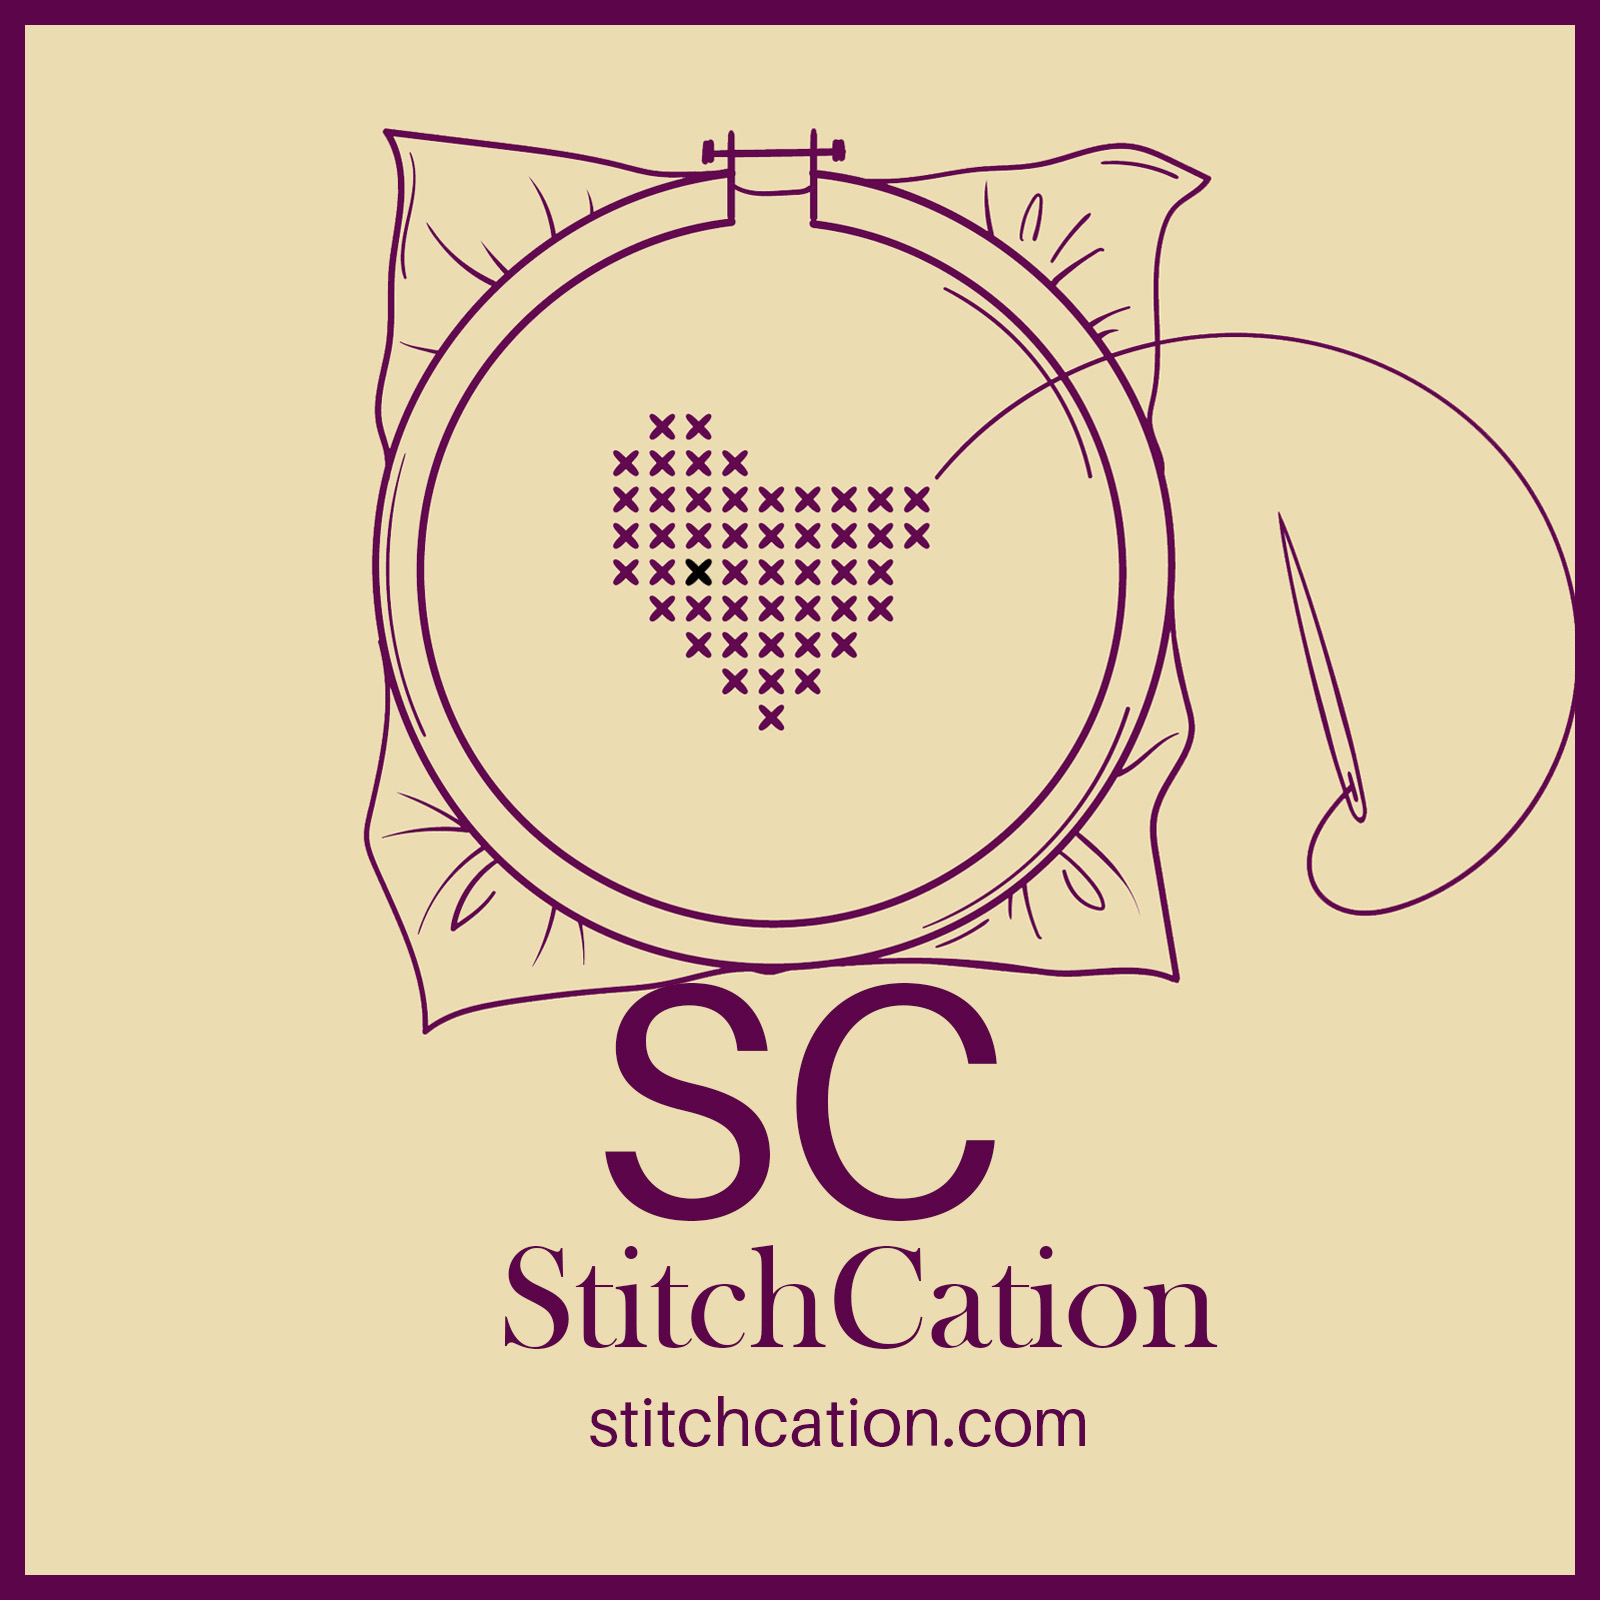 StitchCation ~ Cross Stitch Retreats in your own home! Have a StitchCation!